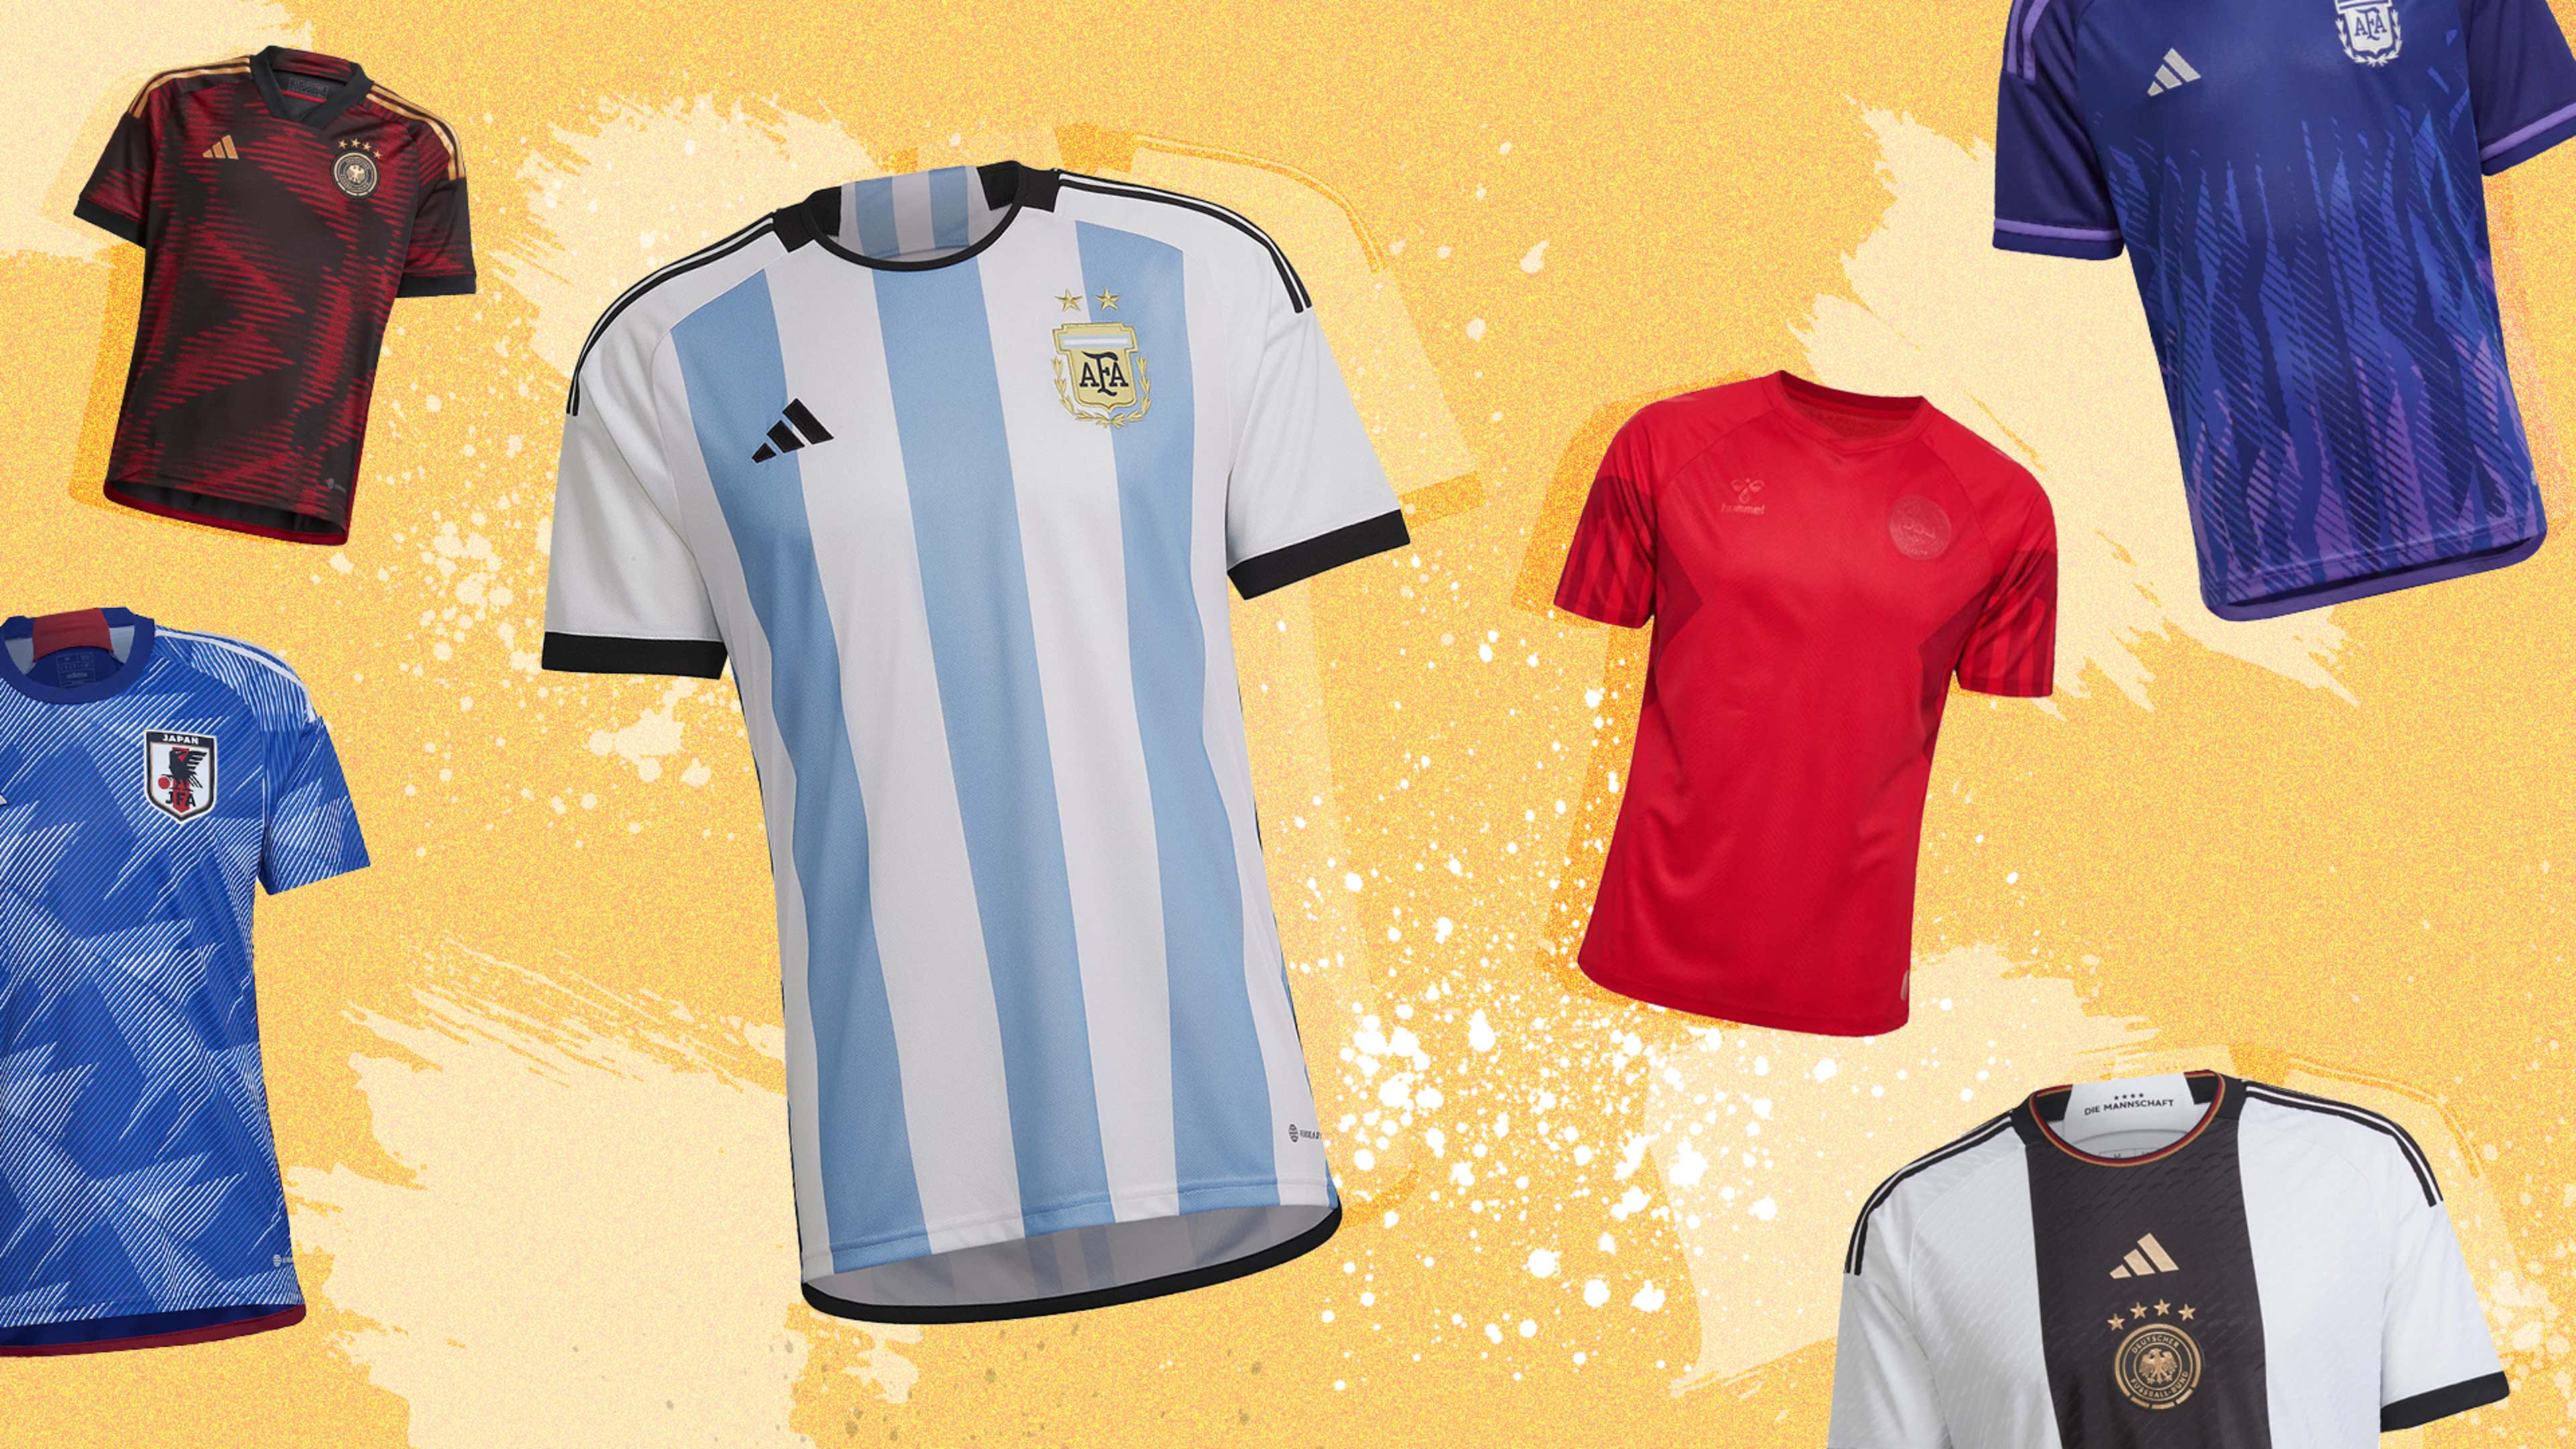 ARGENTINA 2014 WORLD CUP FINALS AUTHENTIC ADIDAS JERSEY HOME SHIRT